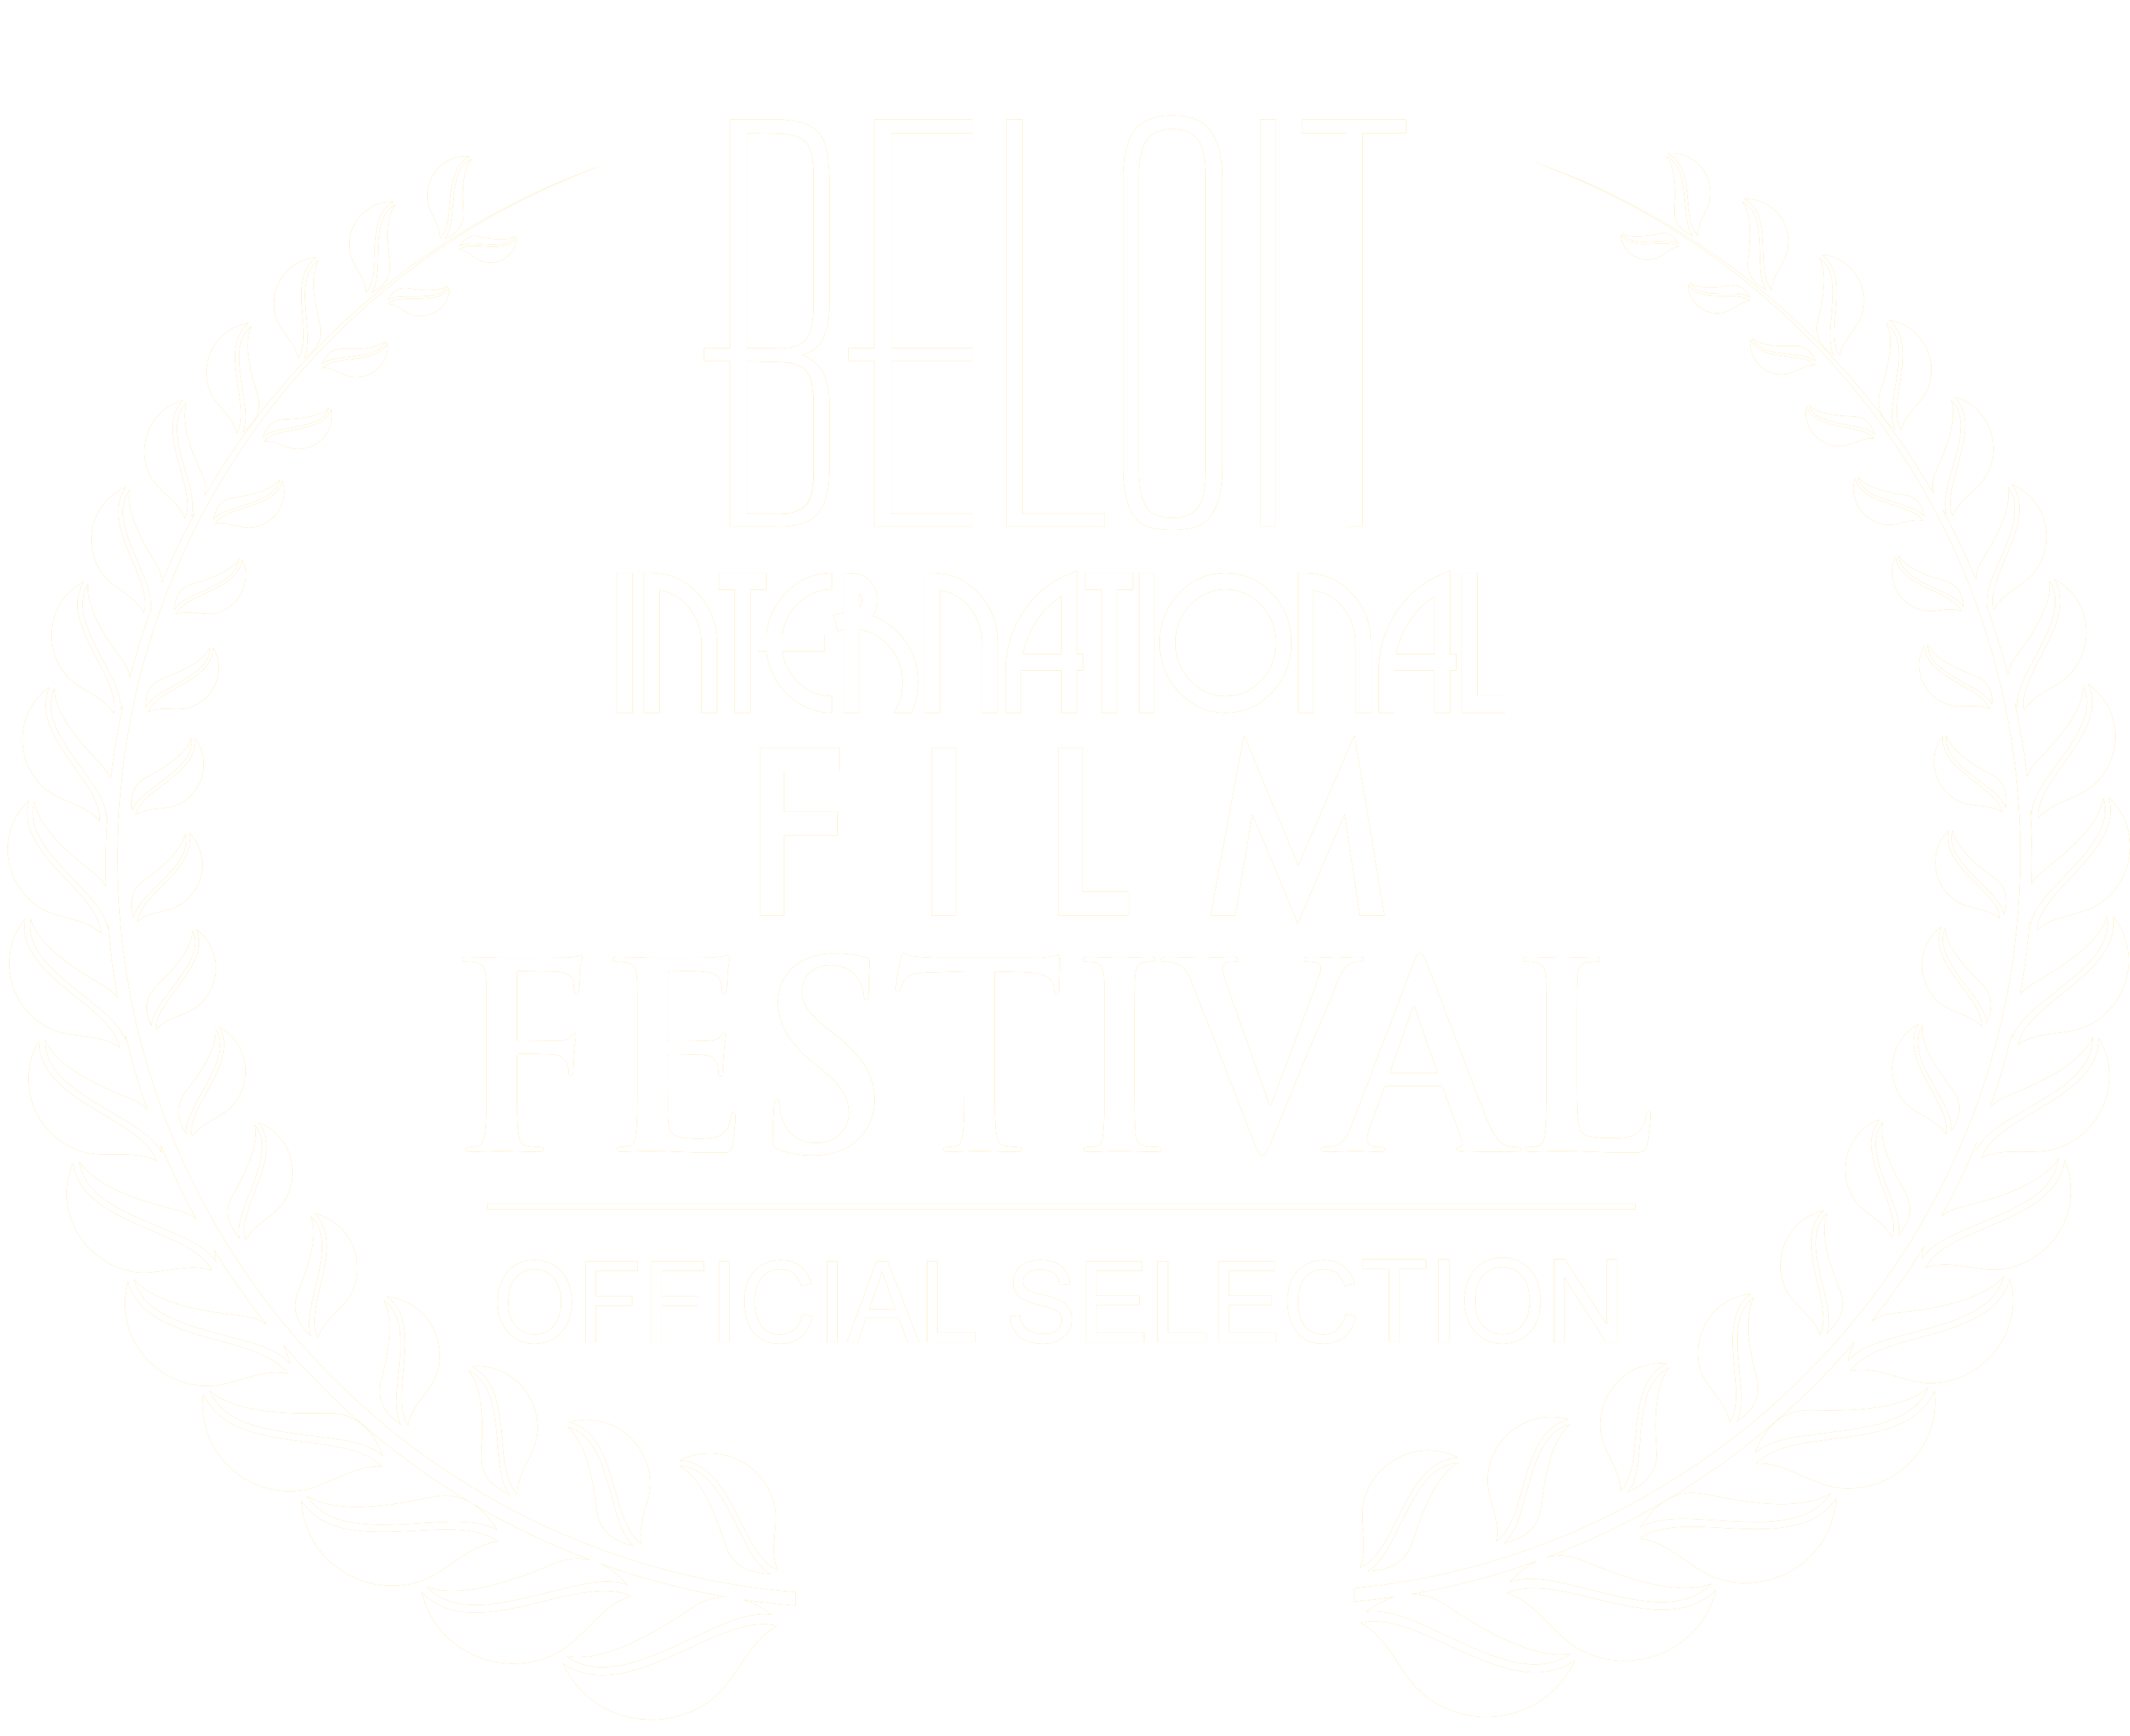 BIFF 2017 Official Selection | White